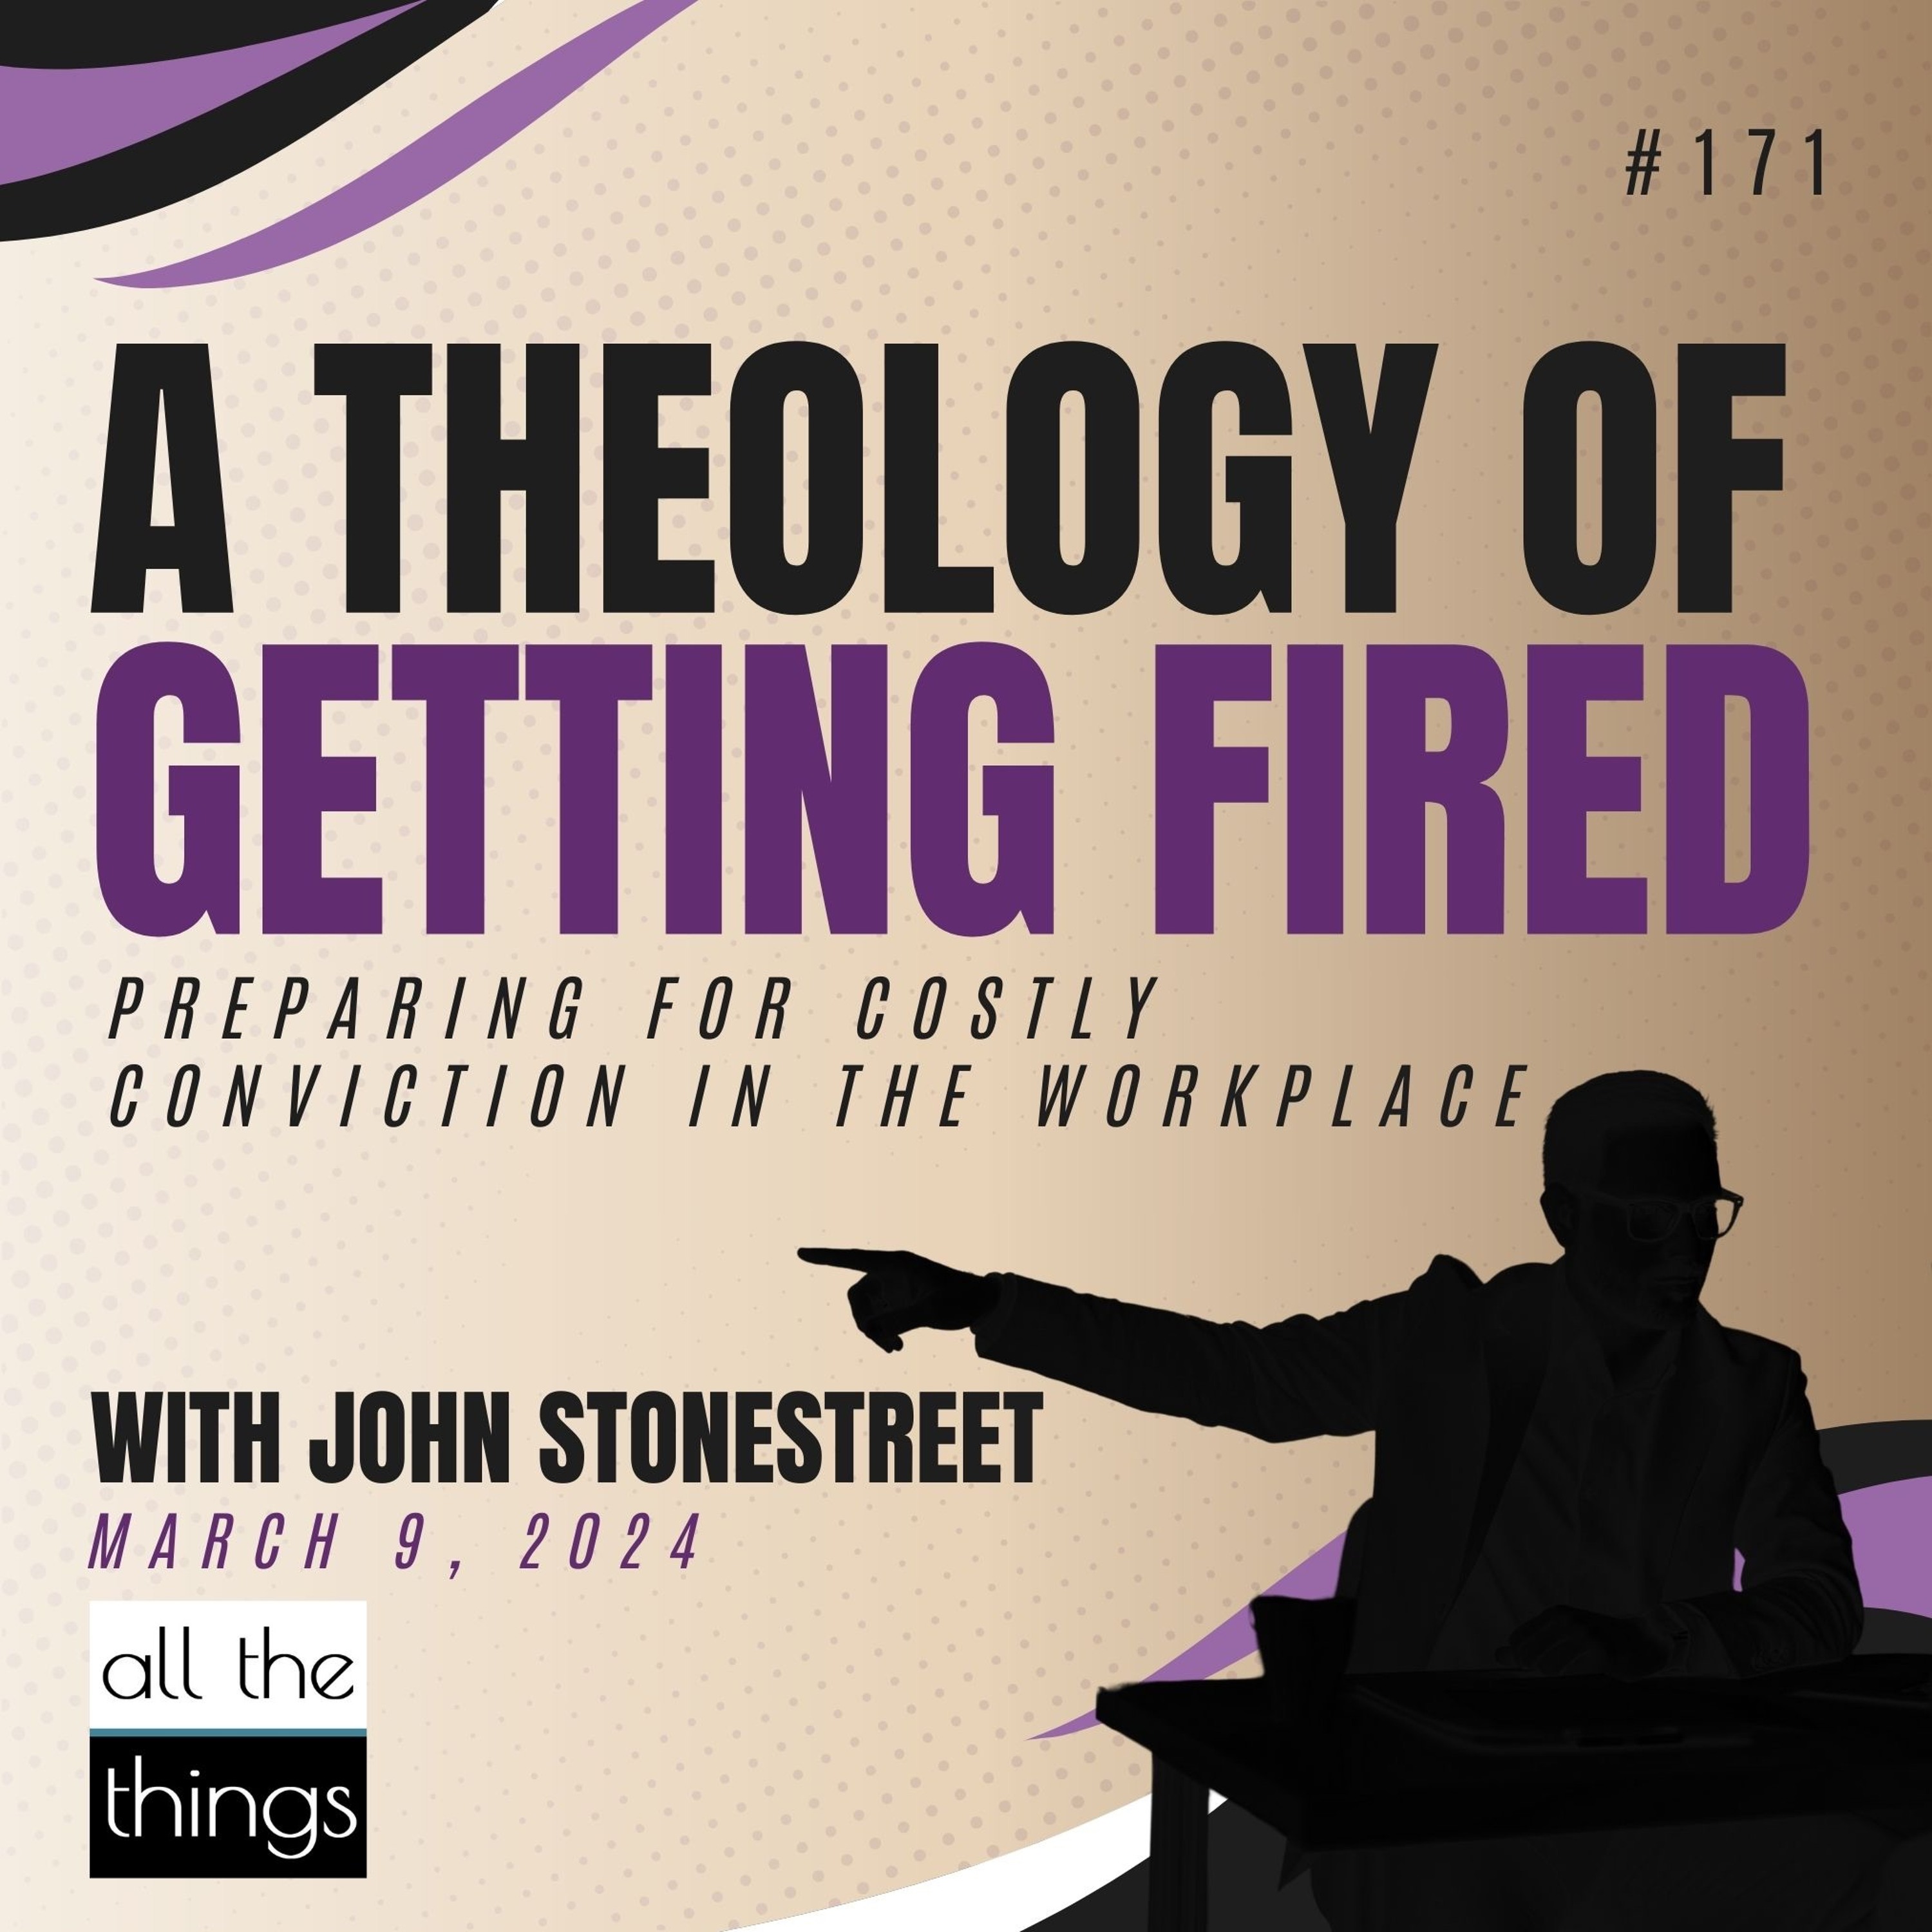 Preparing for Costly Conviction in the Workplace | 3/9/24 | #171